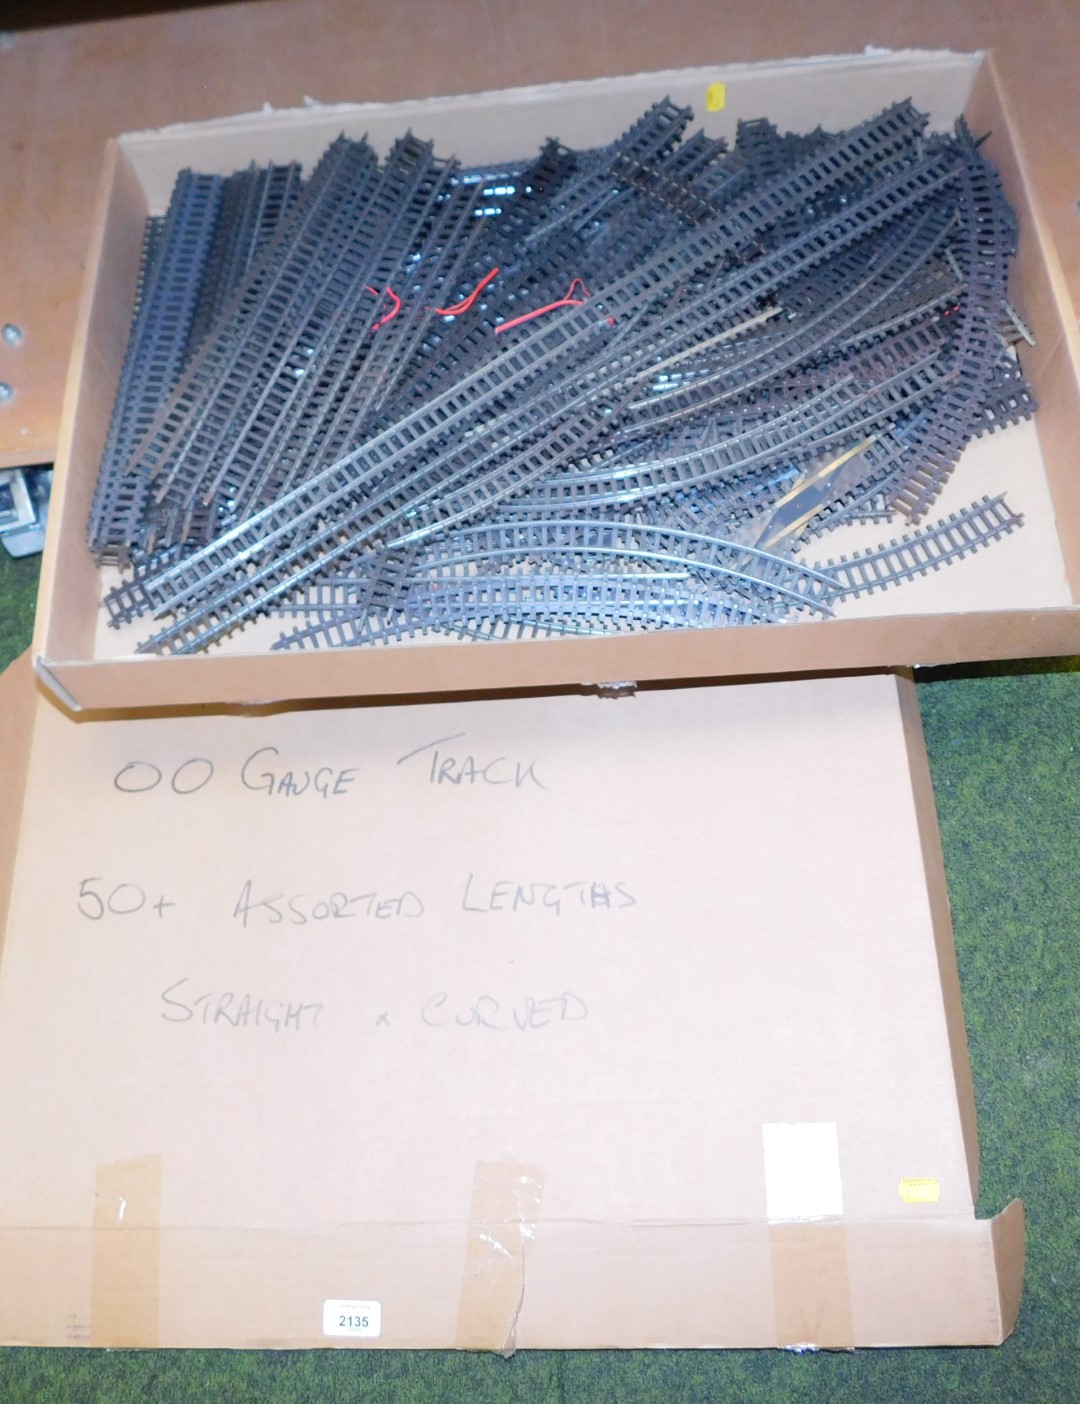 A box with a large selection of OO gauge railway track, parts include straight rail and curved rail,